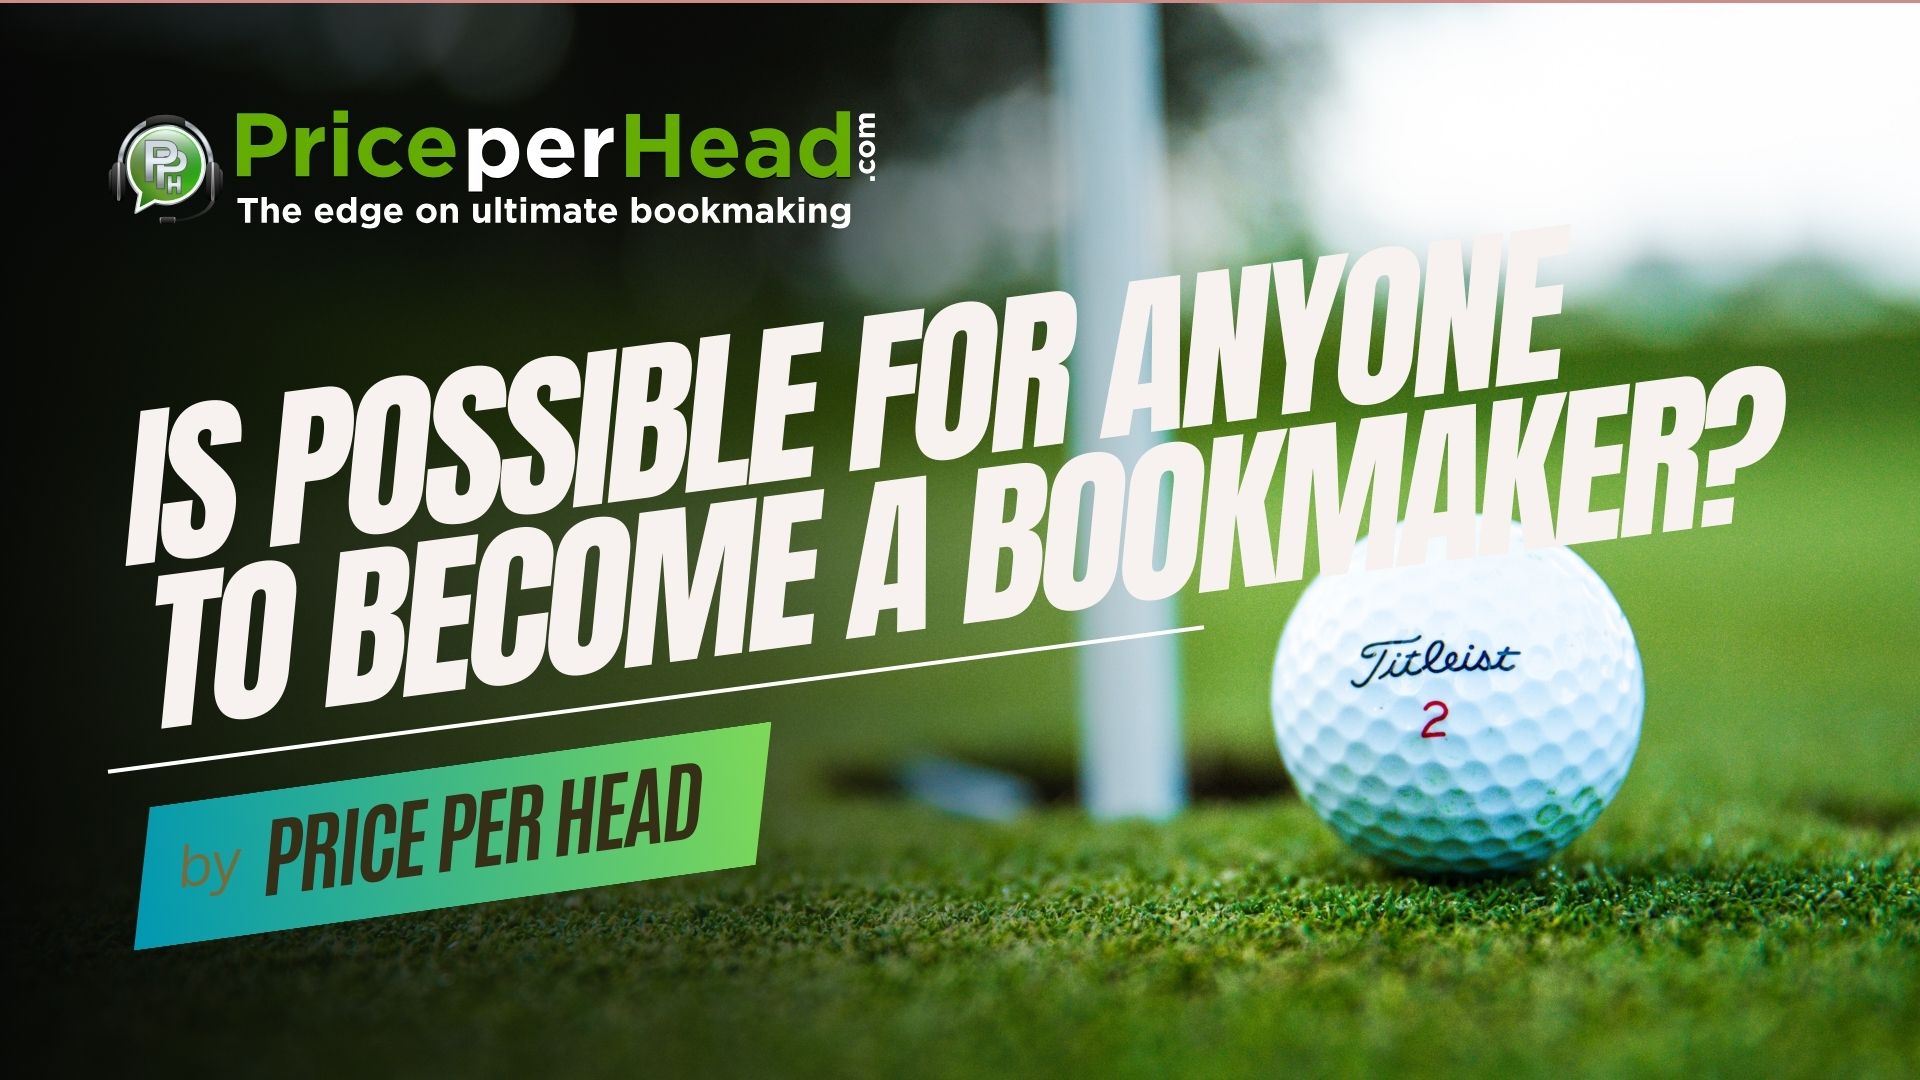 is possible to anyone to become a bookmaker, pay per head, price per head